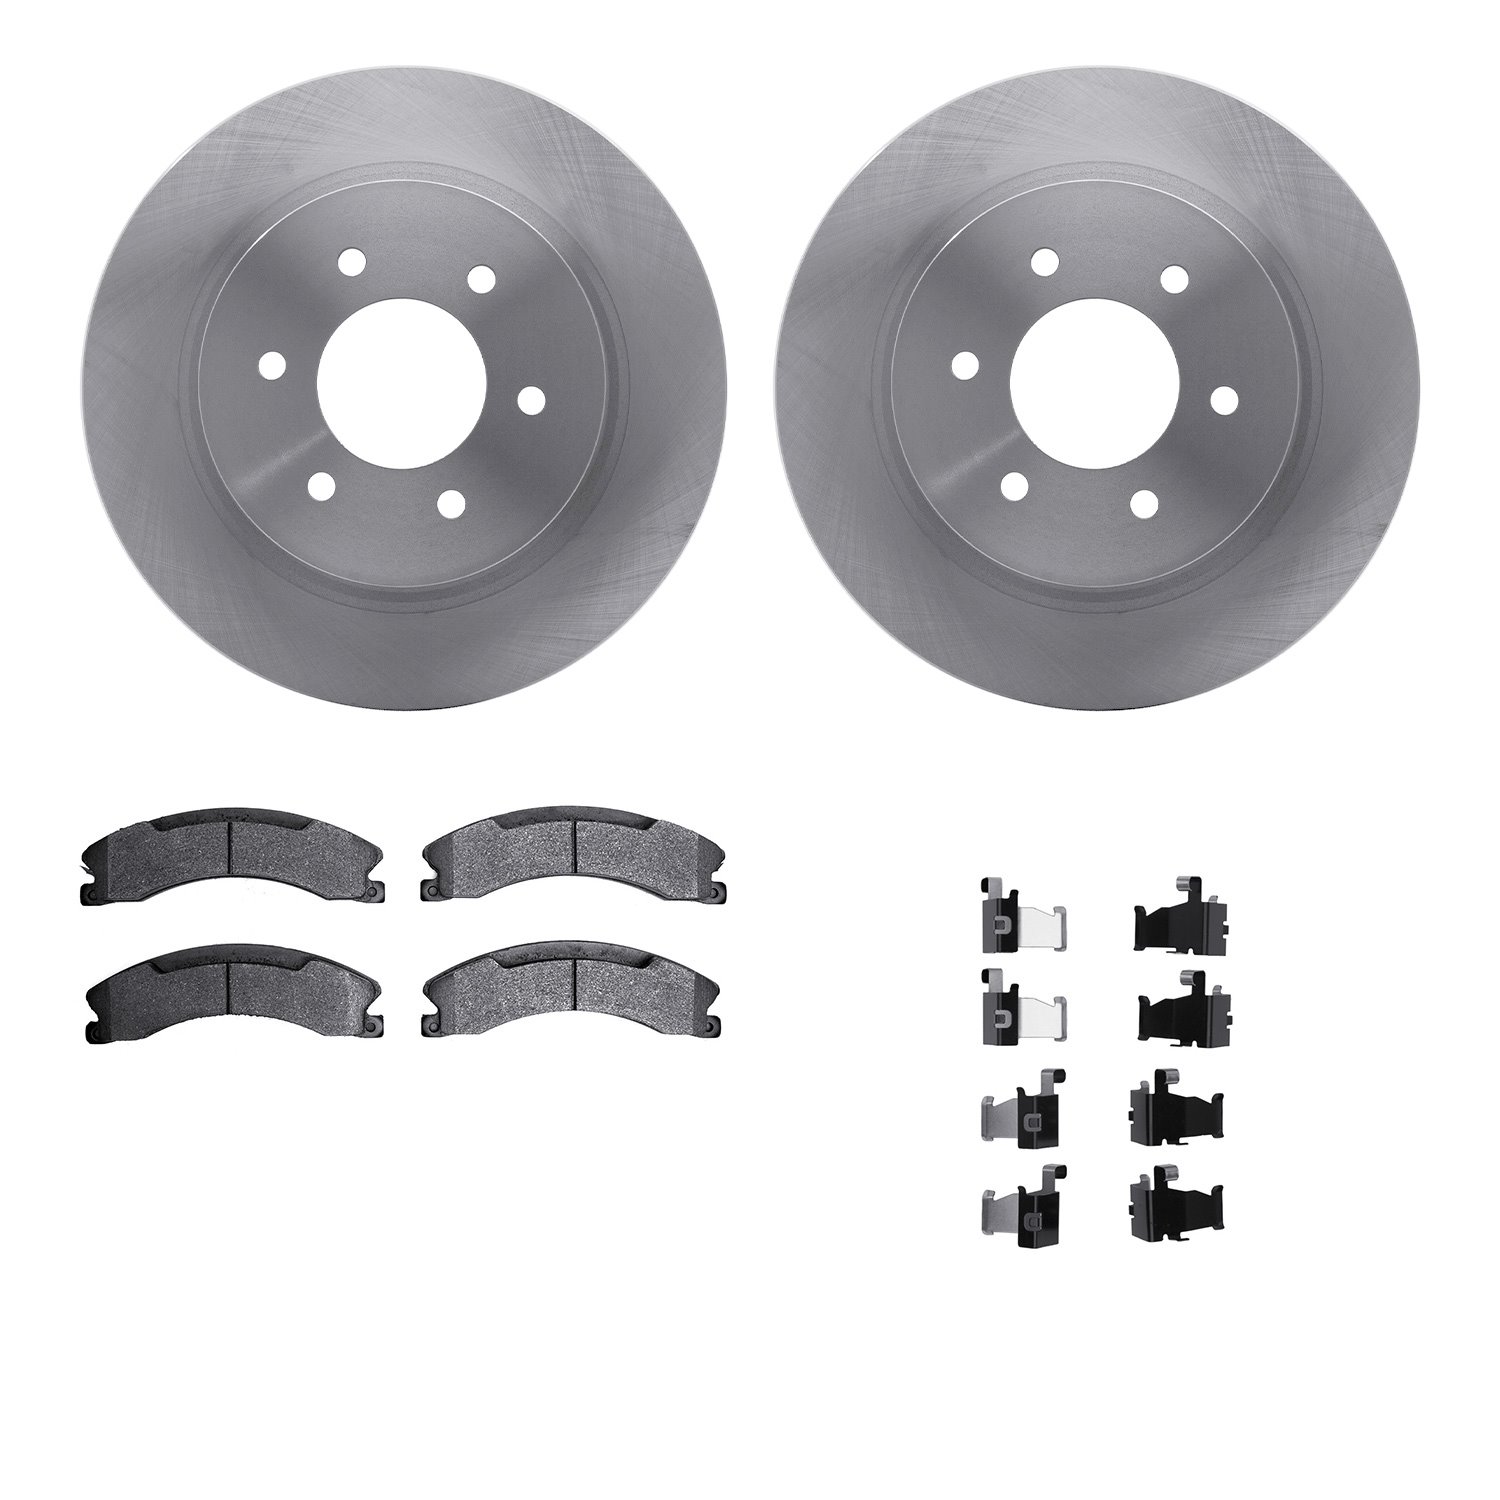 6312-67121 Brake Rotors with 3000-Series Ceramic Brake Pads Kit with Hardware, Fits Select Infiniti/Nissan, Position: Front